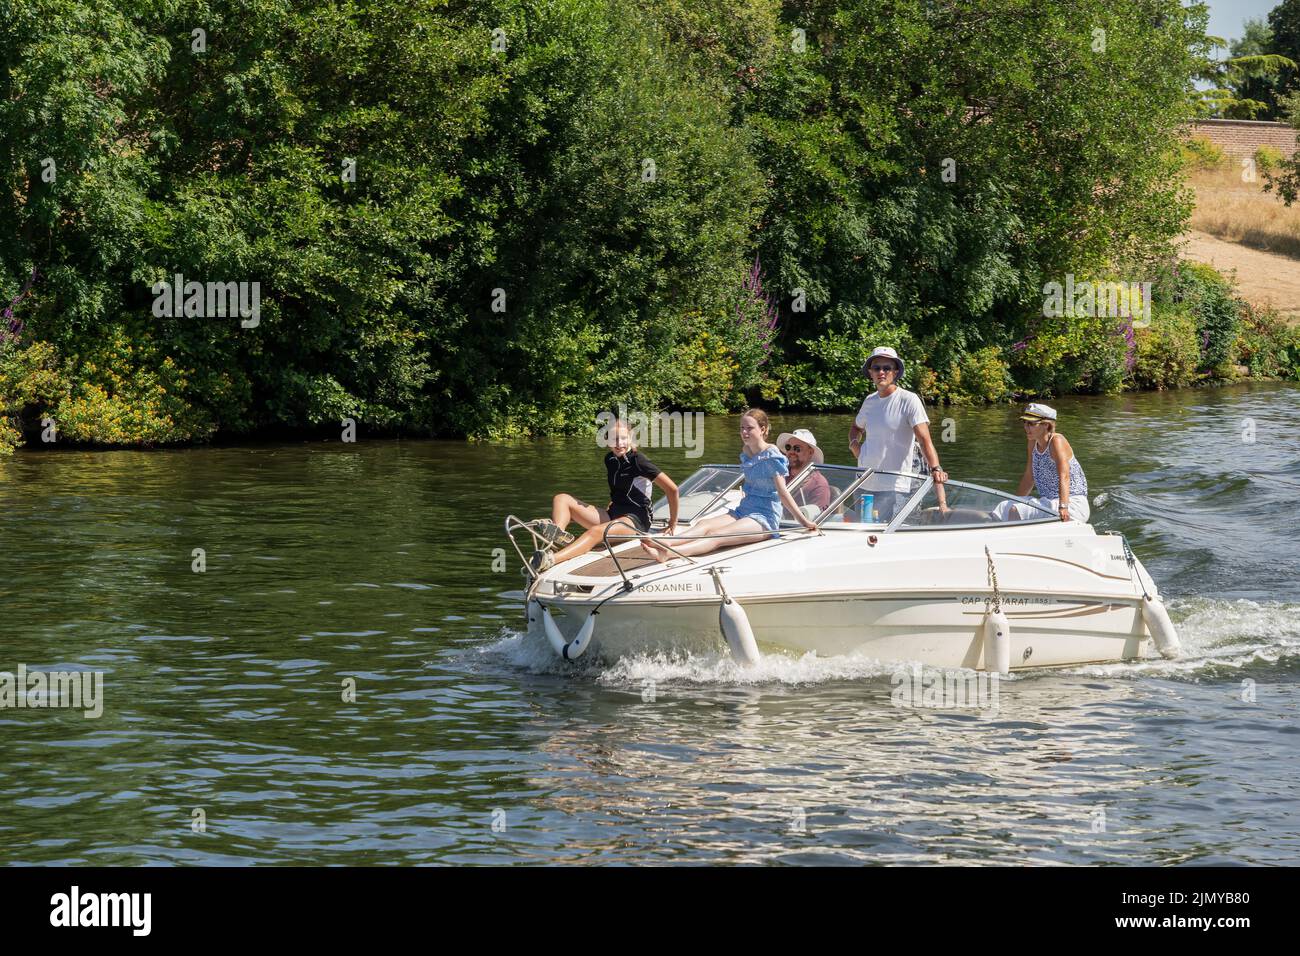 Thames Ditton Surrey, UK - July 15, 2022 : People cruising along the River Thames at Thames Ditton on July 15, 2022. Unidentified people Stock Photo